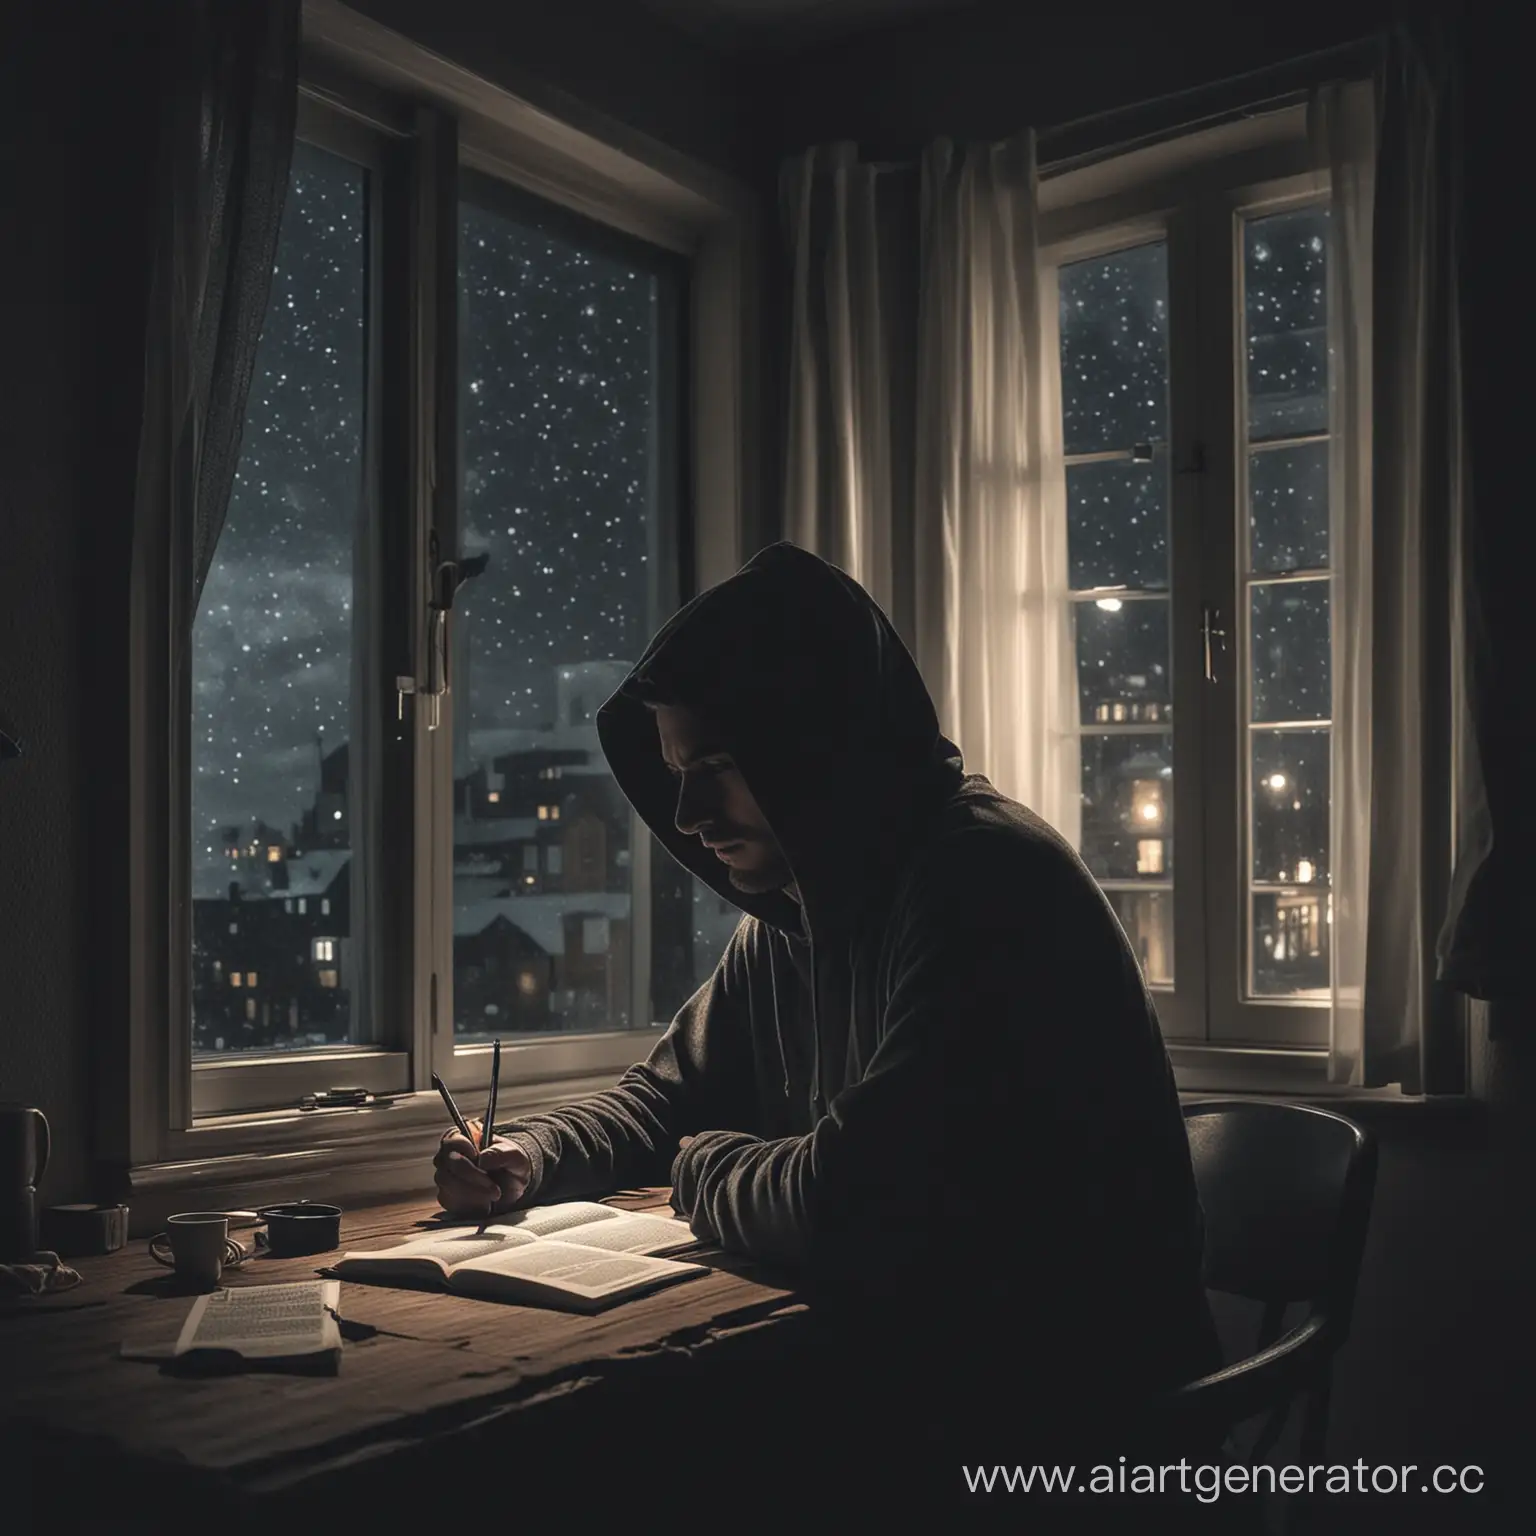 Writer-in-Hooded-Silhouette-Composes-Novel-by-Moonlit-Window